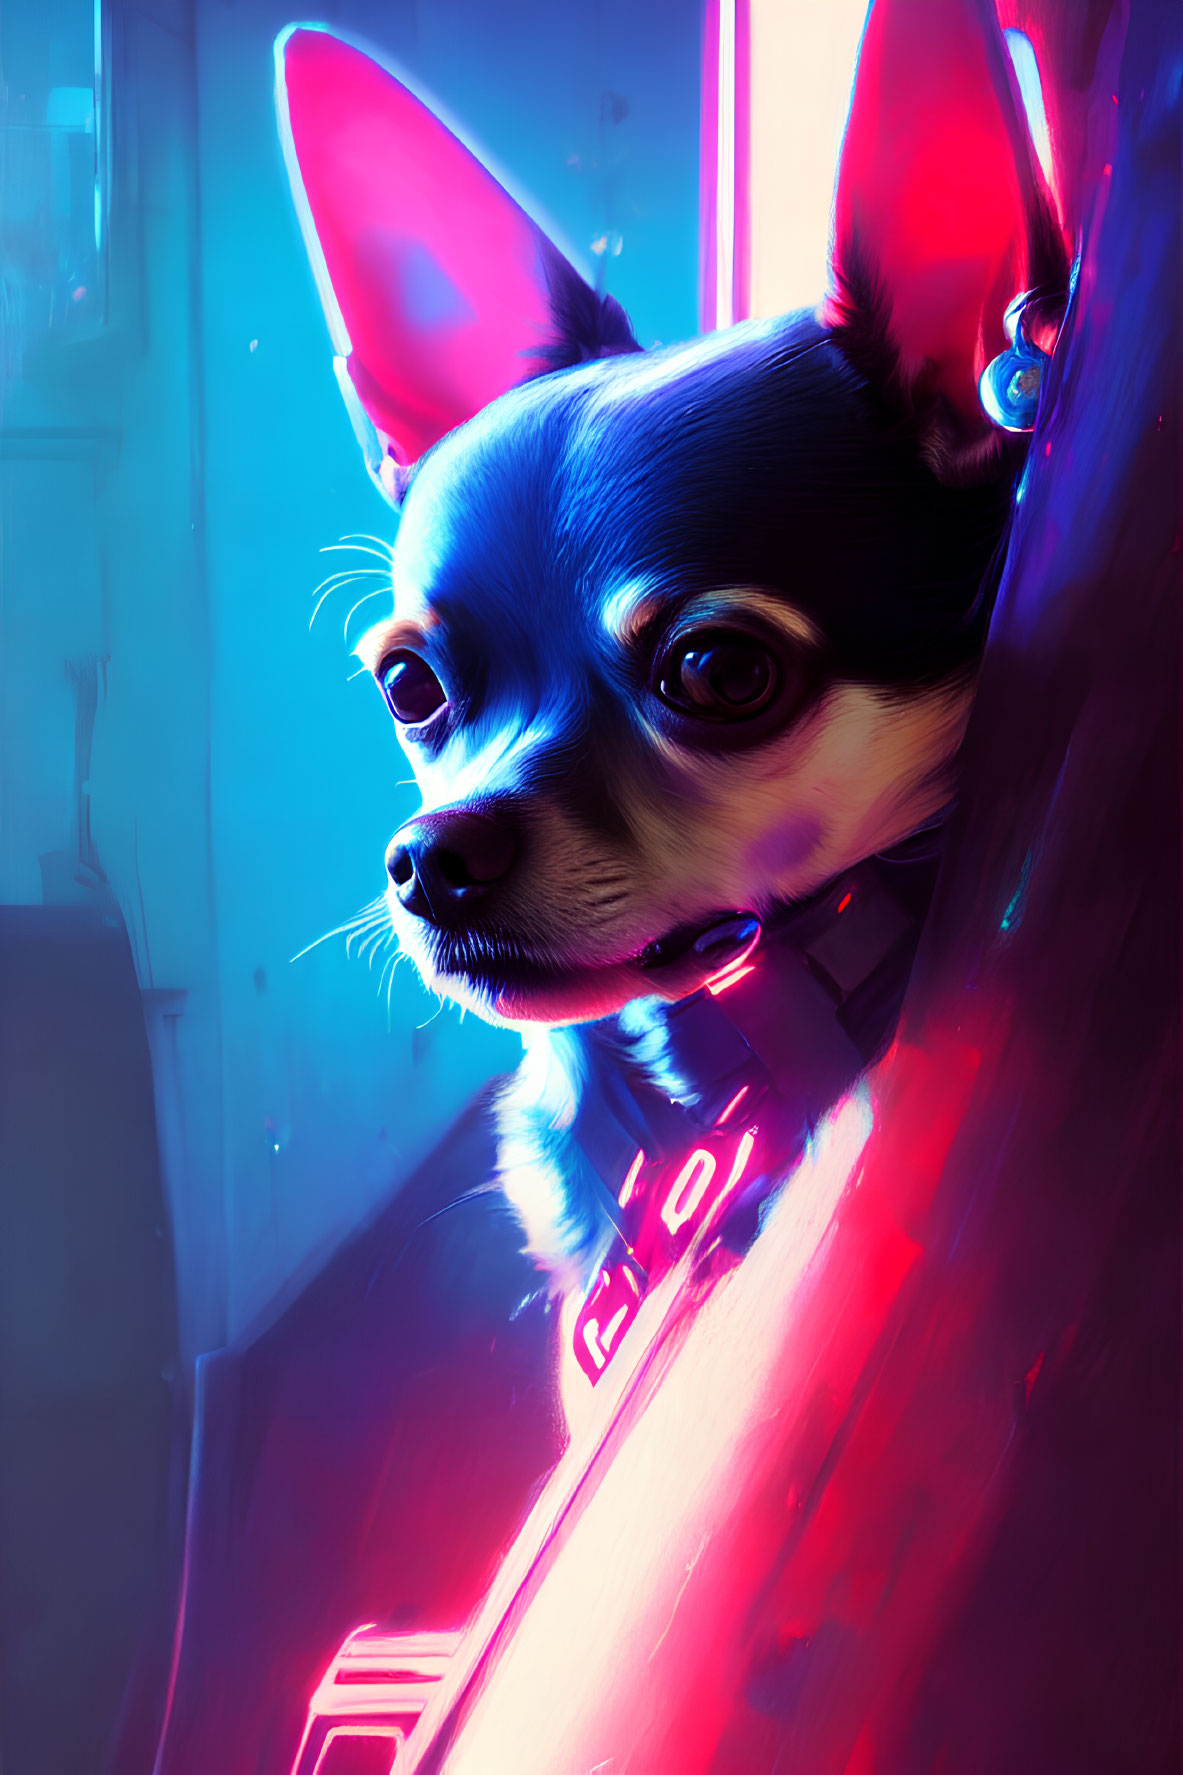 Colorful Chihuahua portrait with futuristic neon lighting.